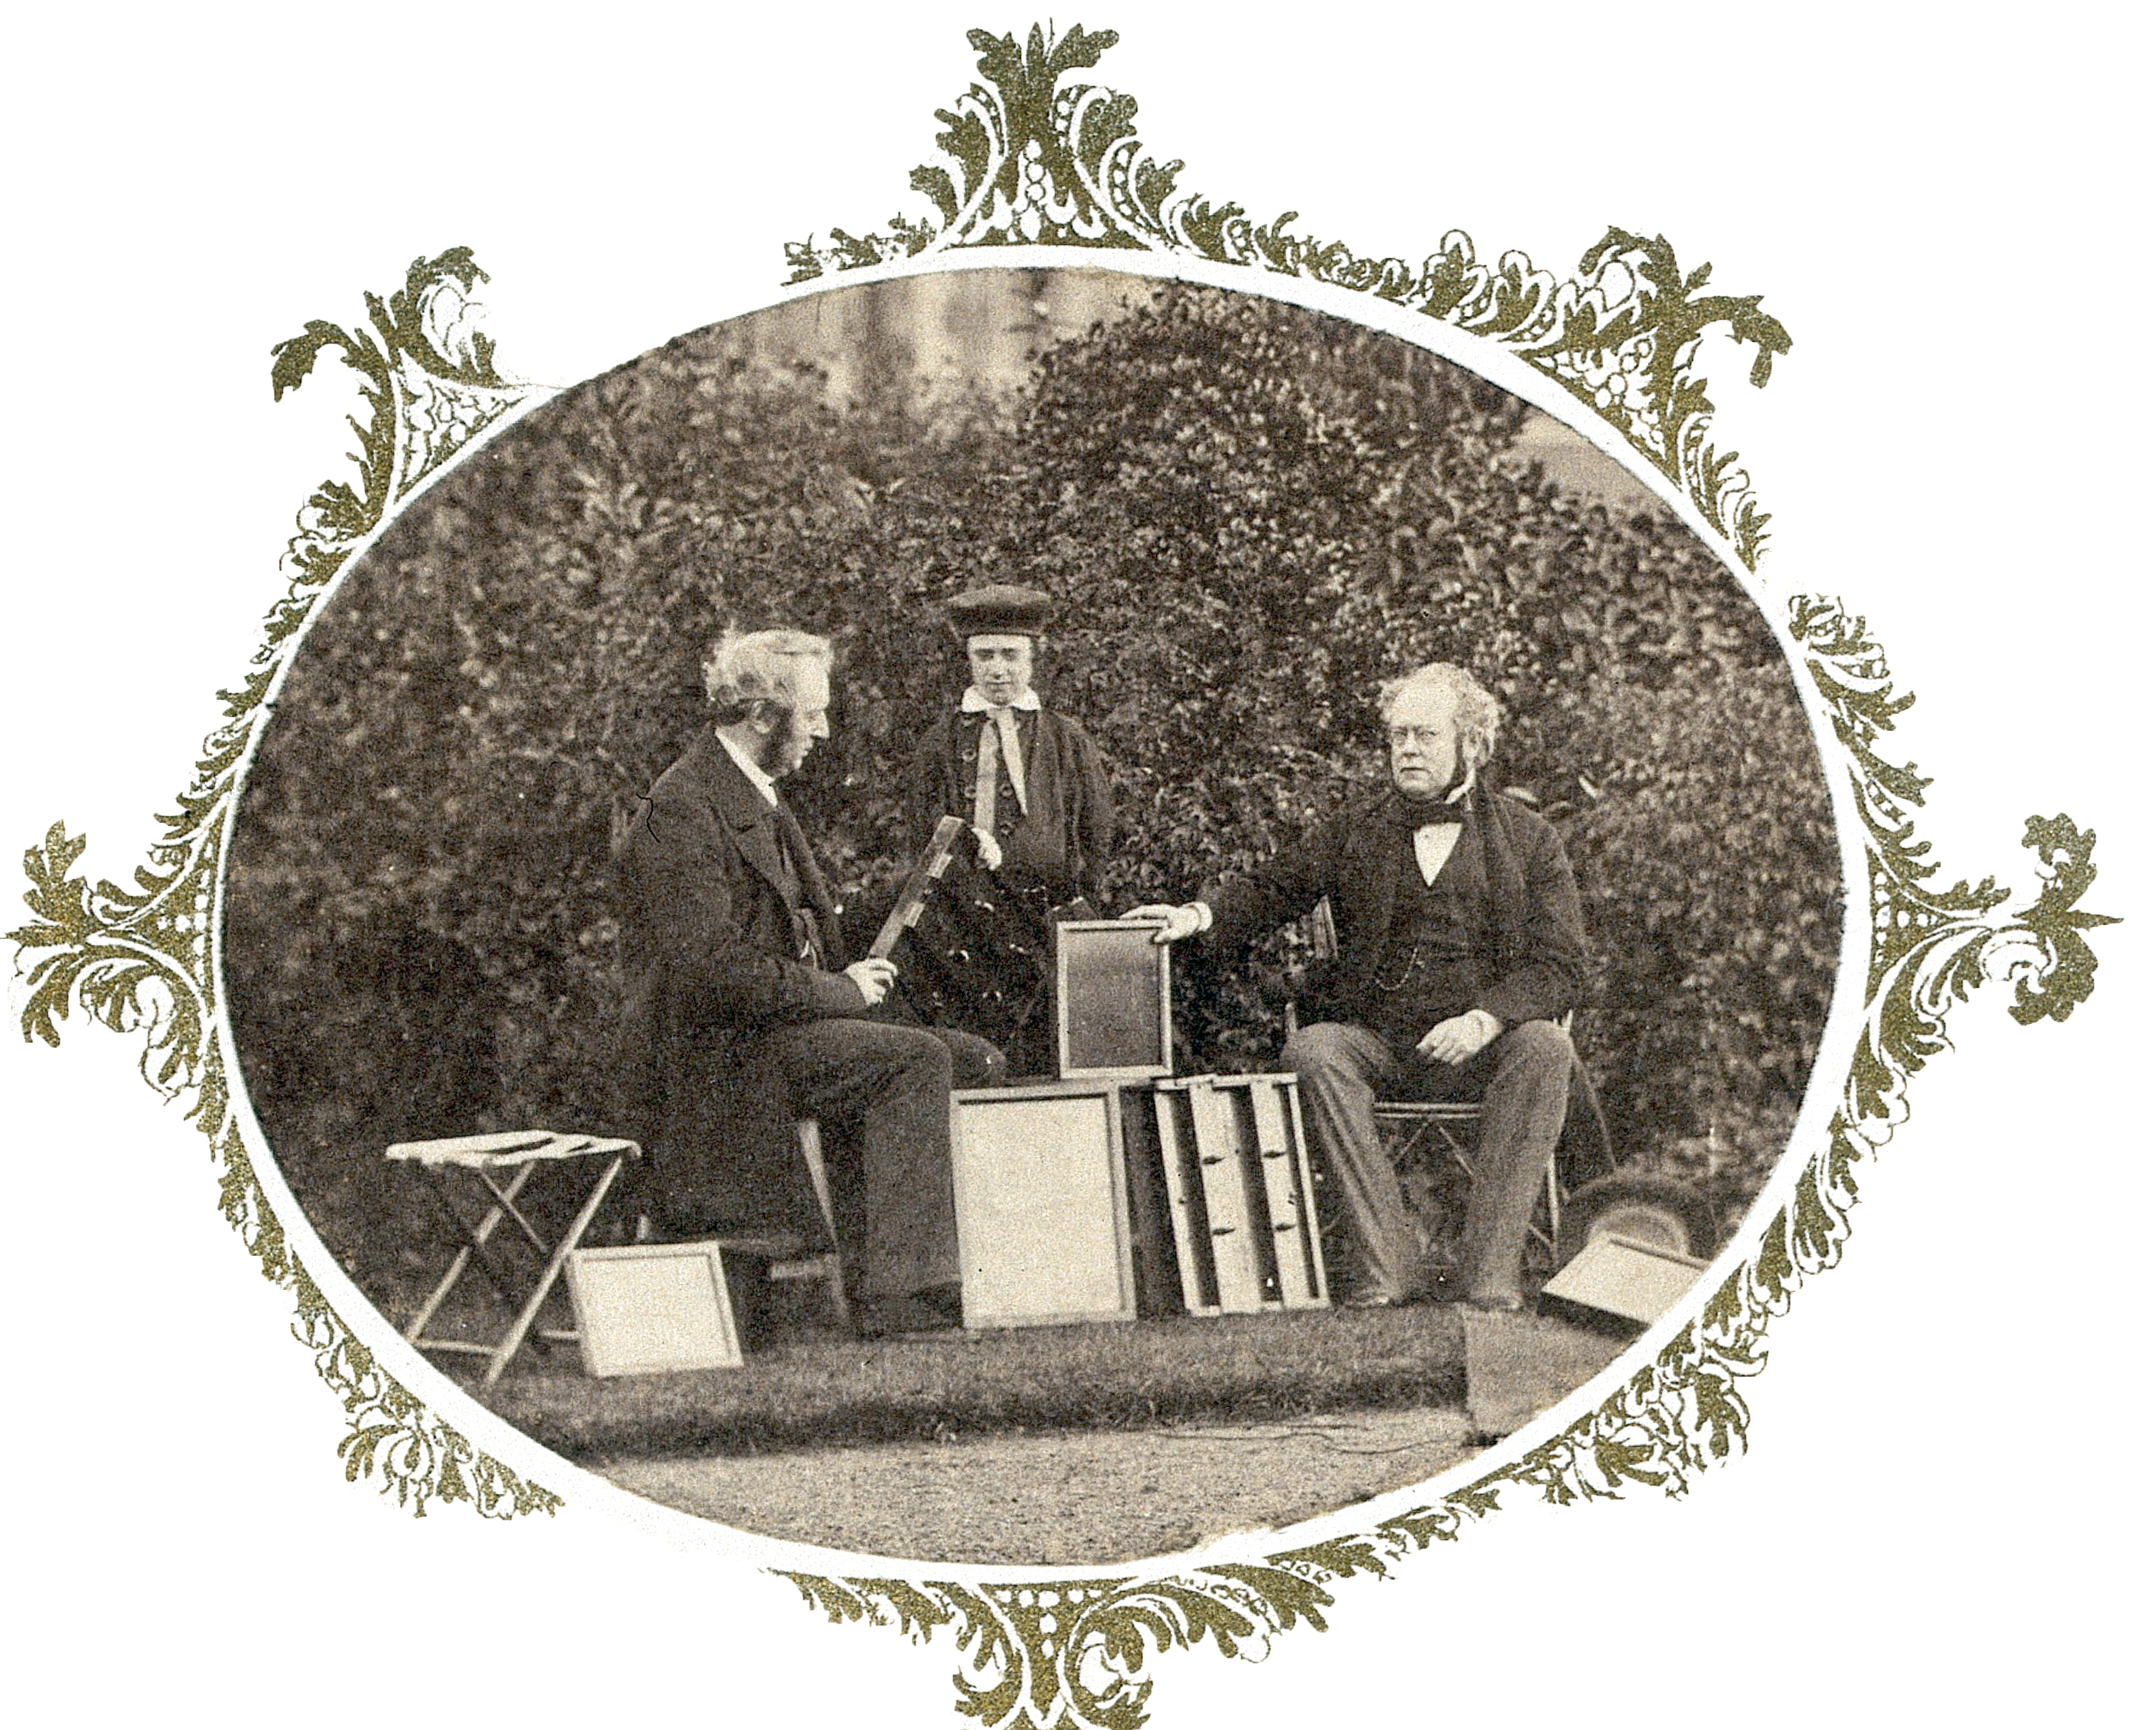 Photographic Society Club members 1856 (detail)